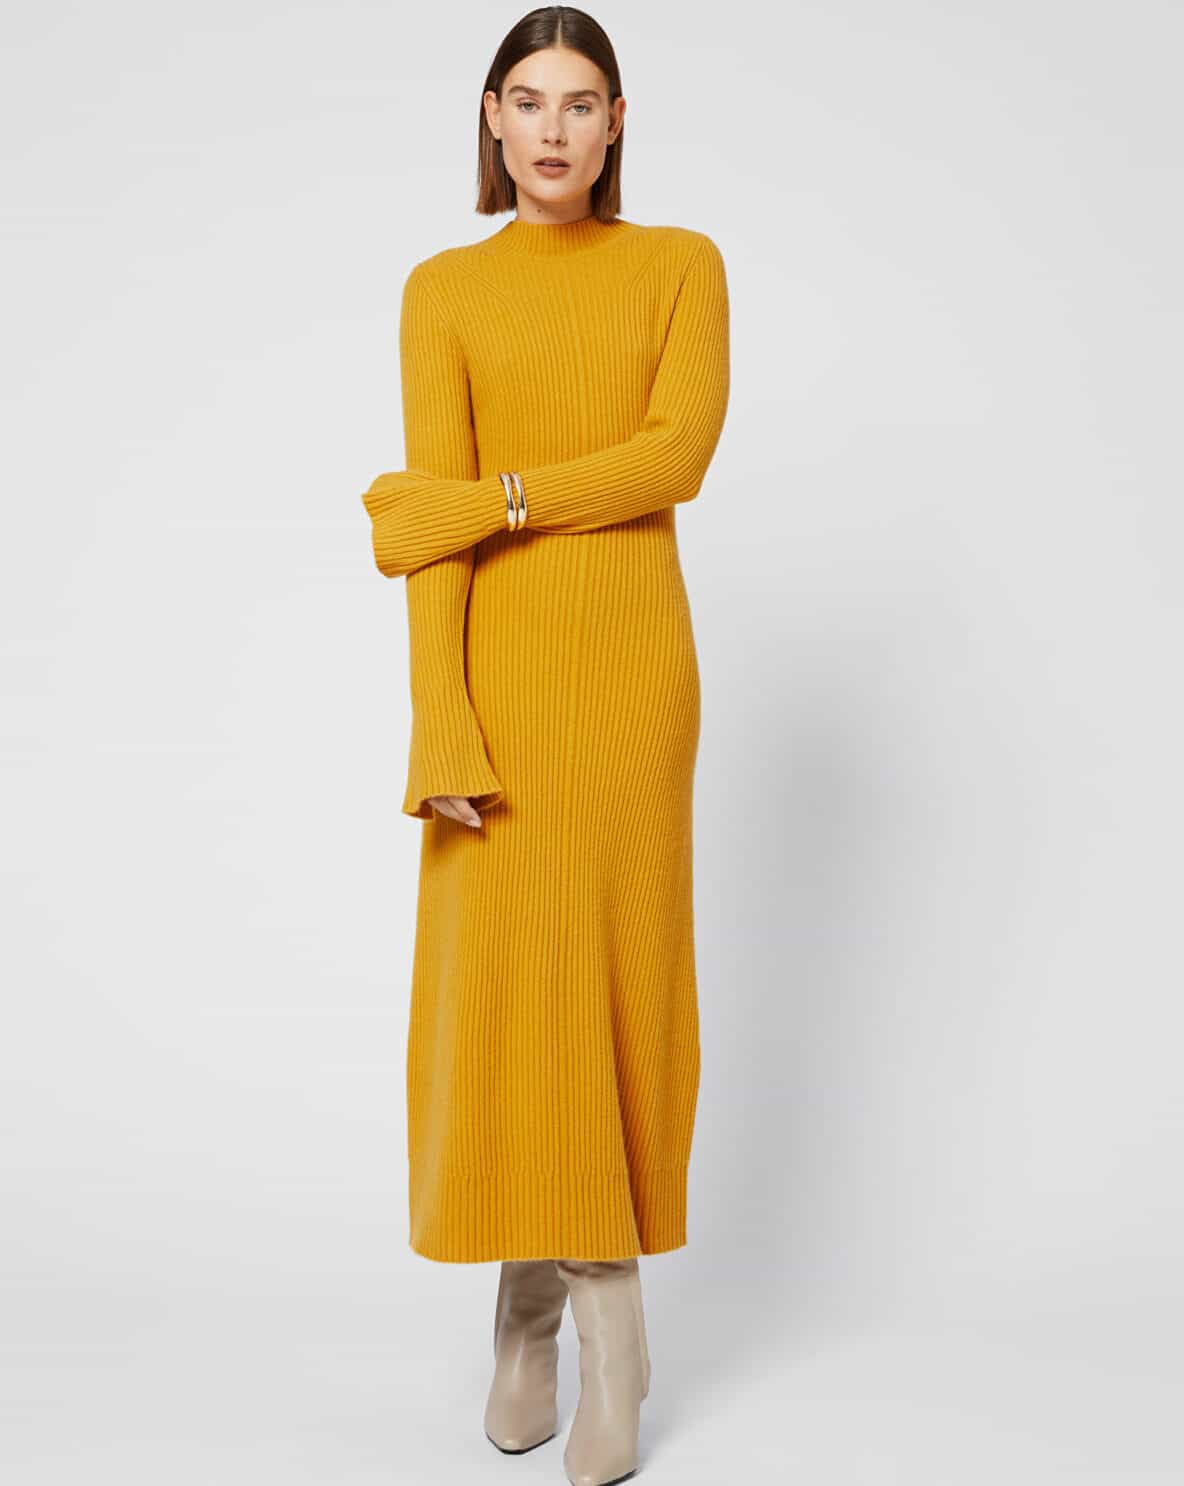 Fitted A-Line Wool Knit Dress